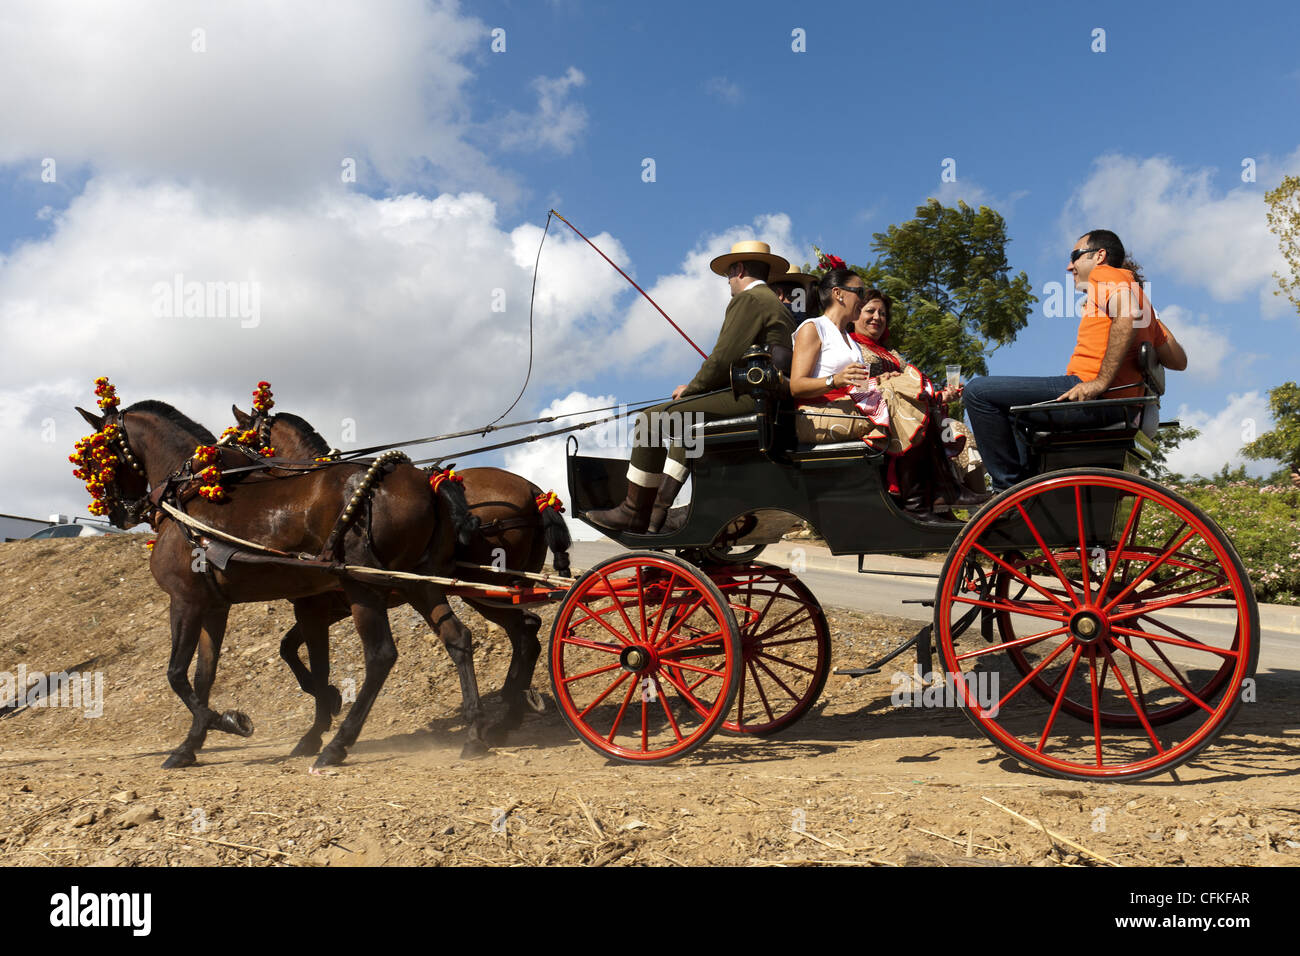 Two Horse carriage with passengers enjoying a day out,  La Cala de Mijas, Andalucia. Spain Stock Photo